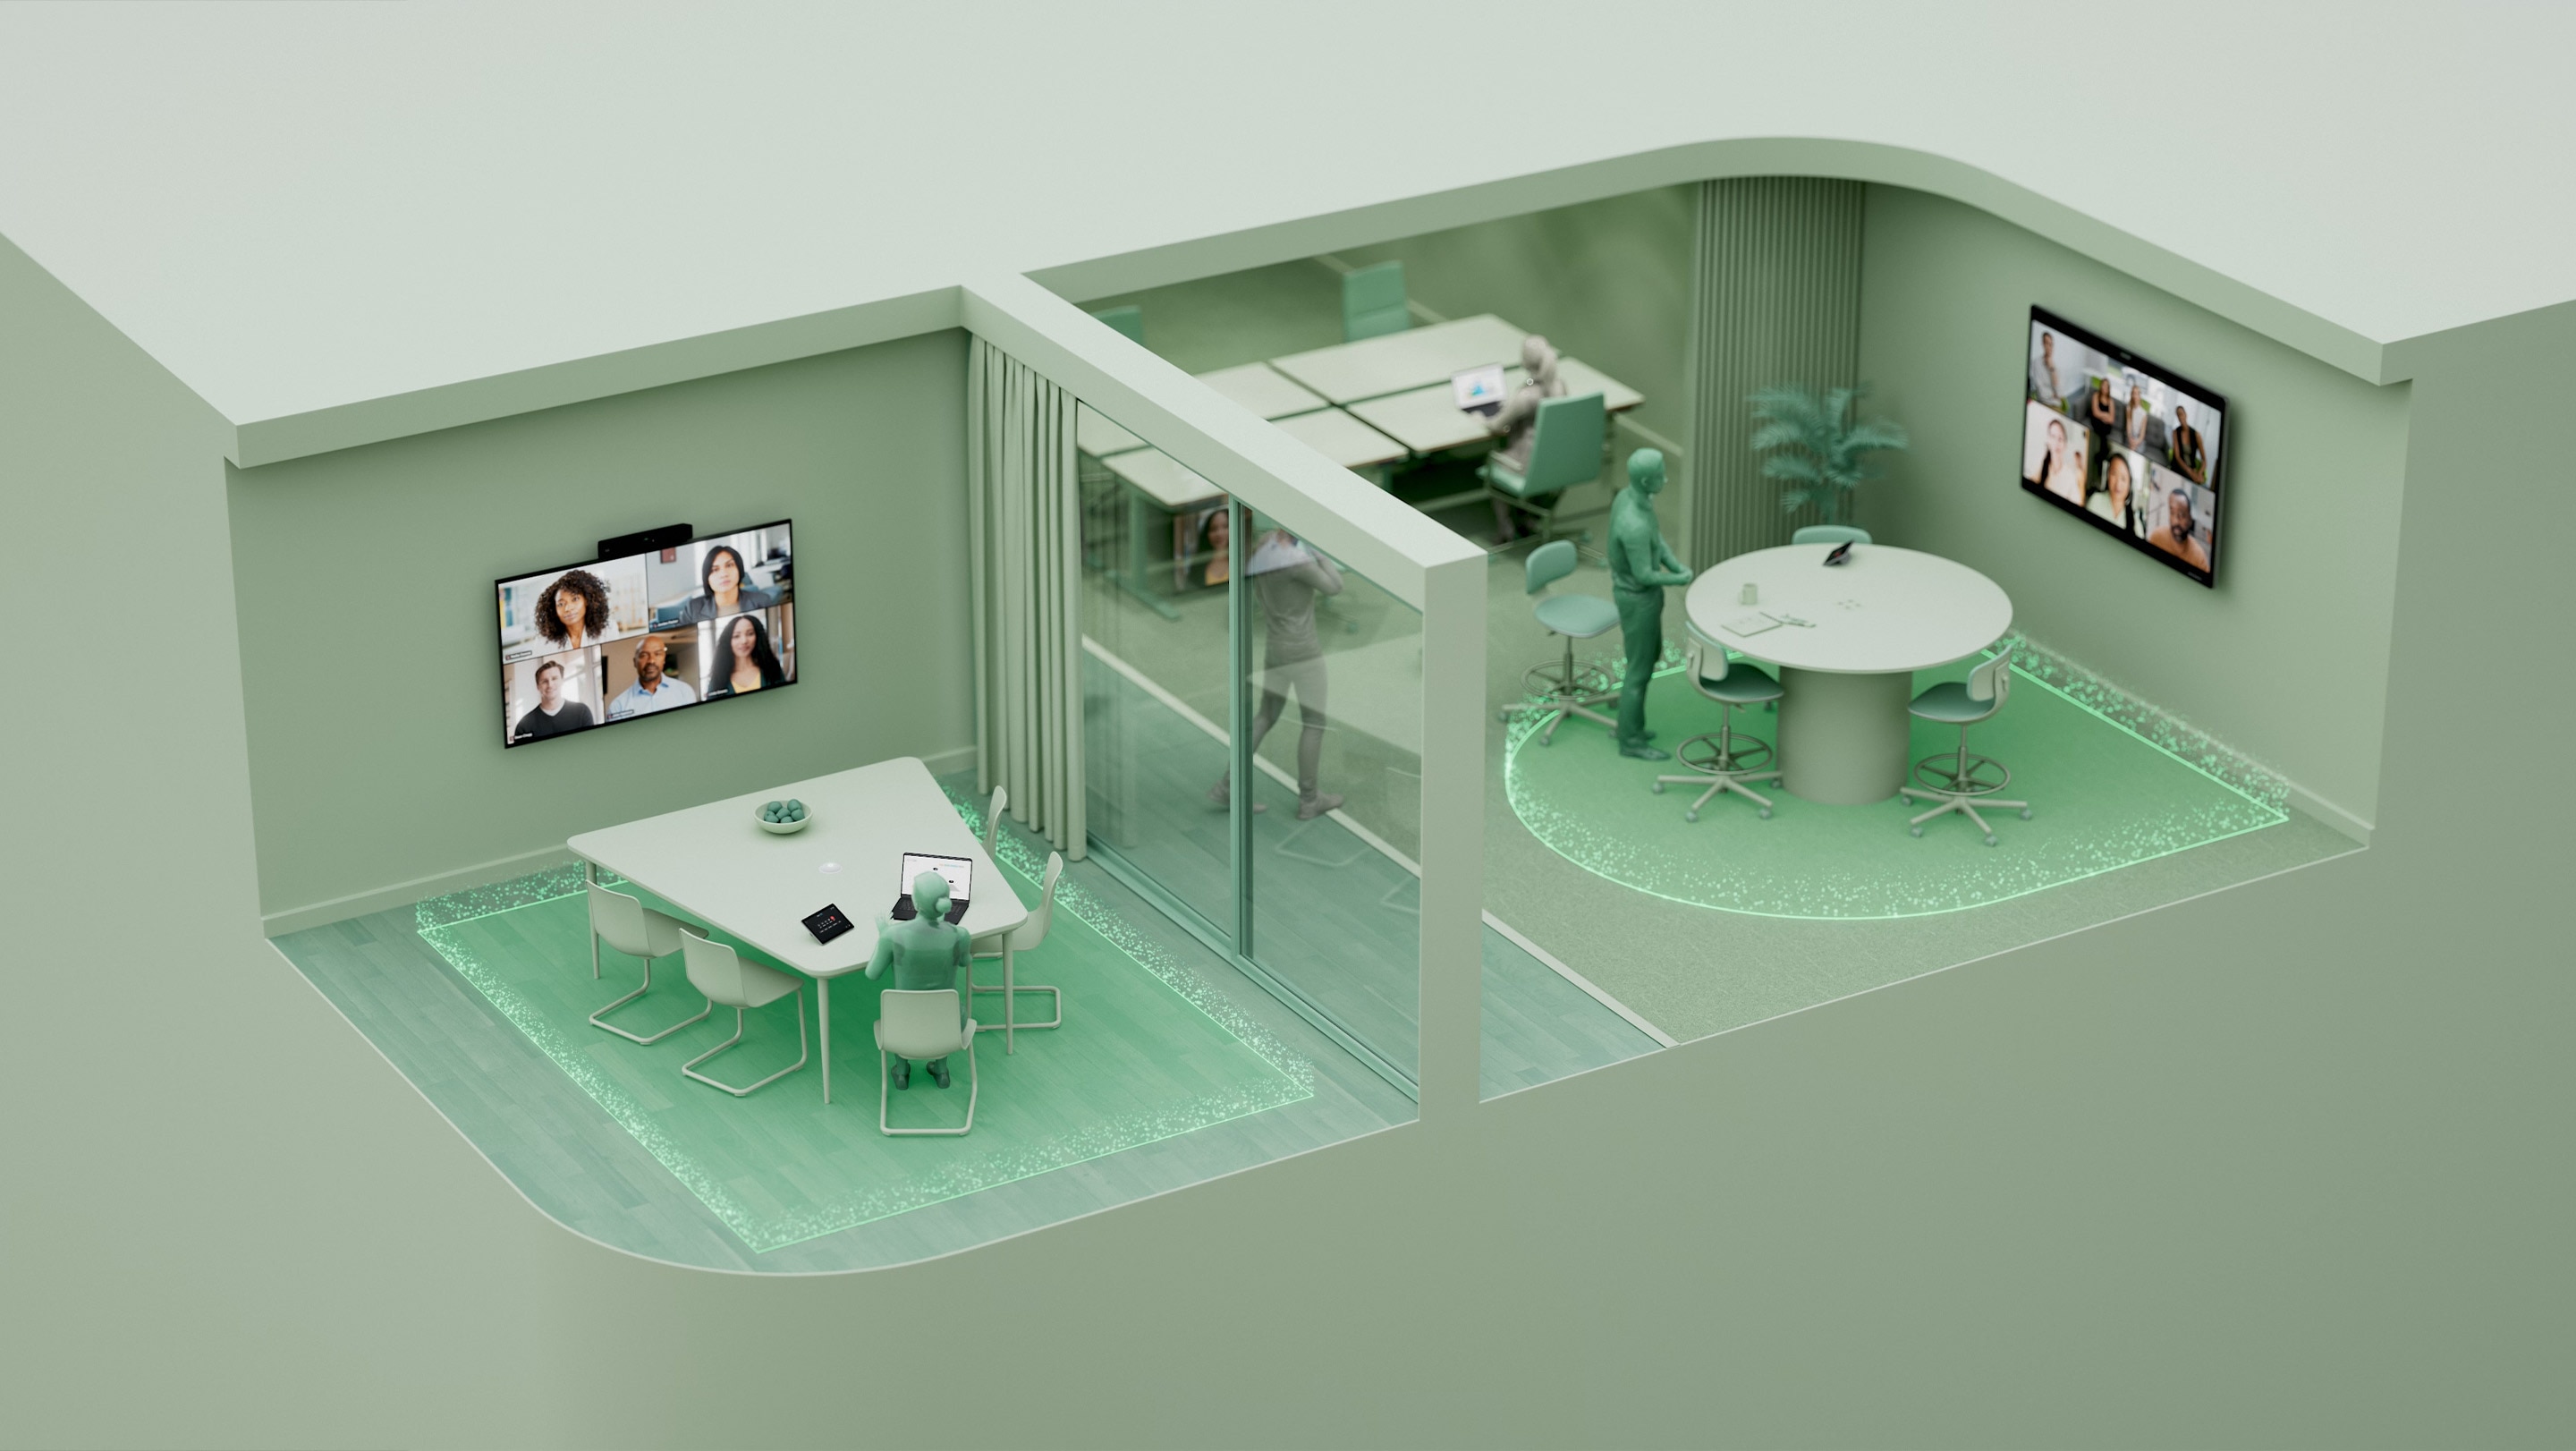 Rendering of hybrid workspace with small conference room, open ideation space, and Cisco Room and Board devices.